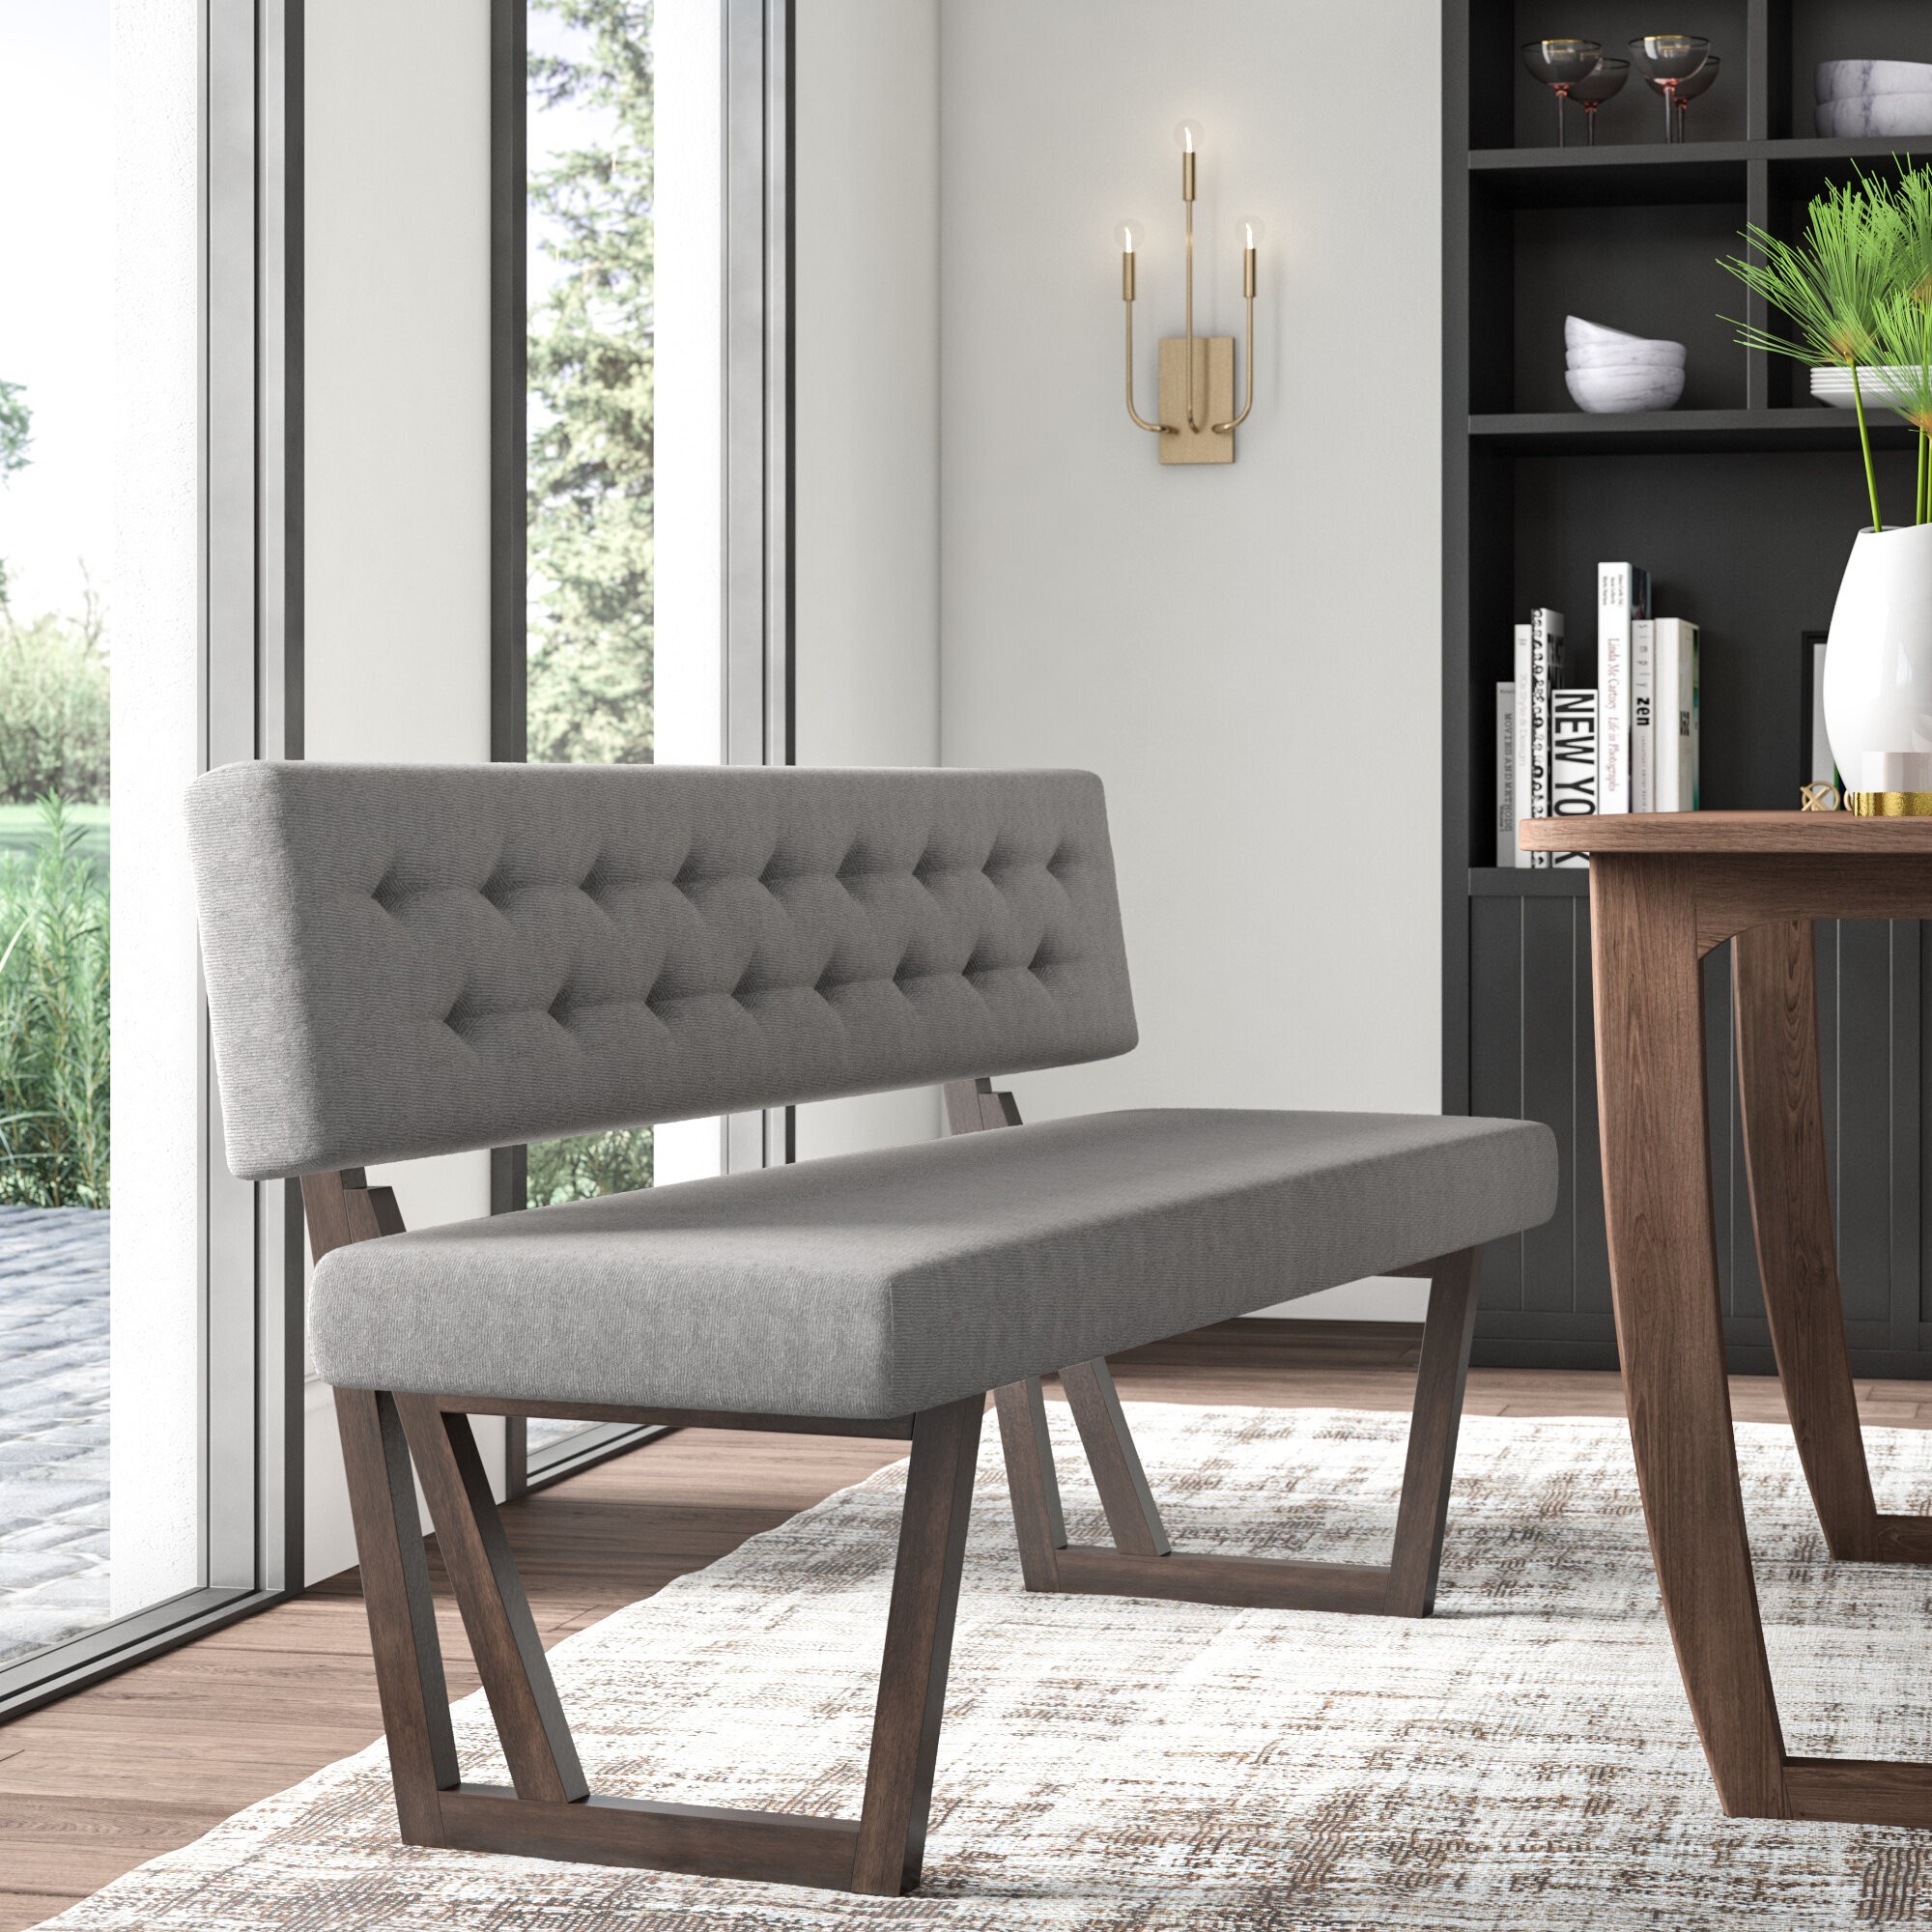 indoor dining table with bench seats australia        <h3 class=